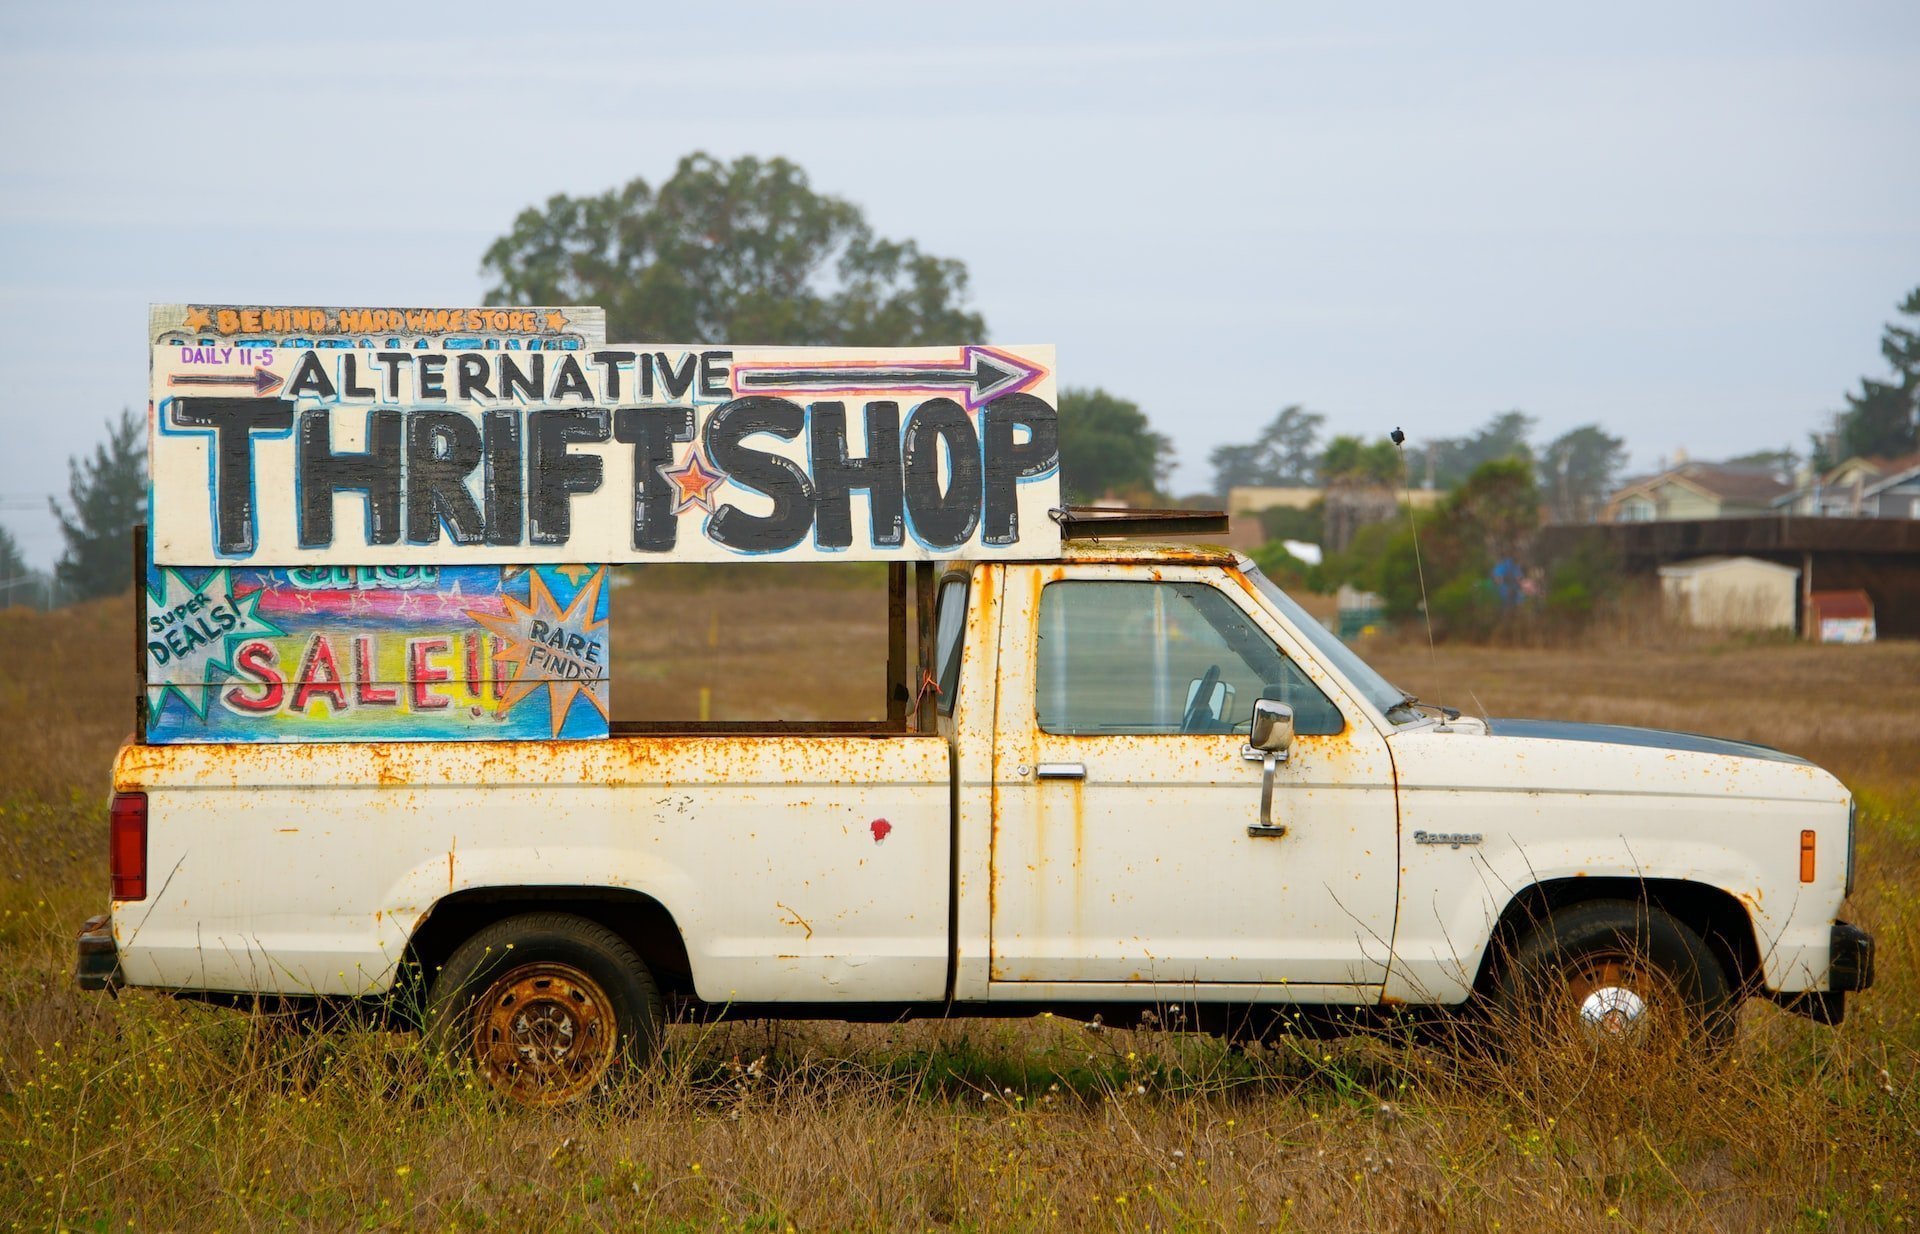 How to Begin Downsizing When You Want to Live Minimally: A white ute bearing a painted sign that says "Alternative Thrift Shop"